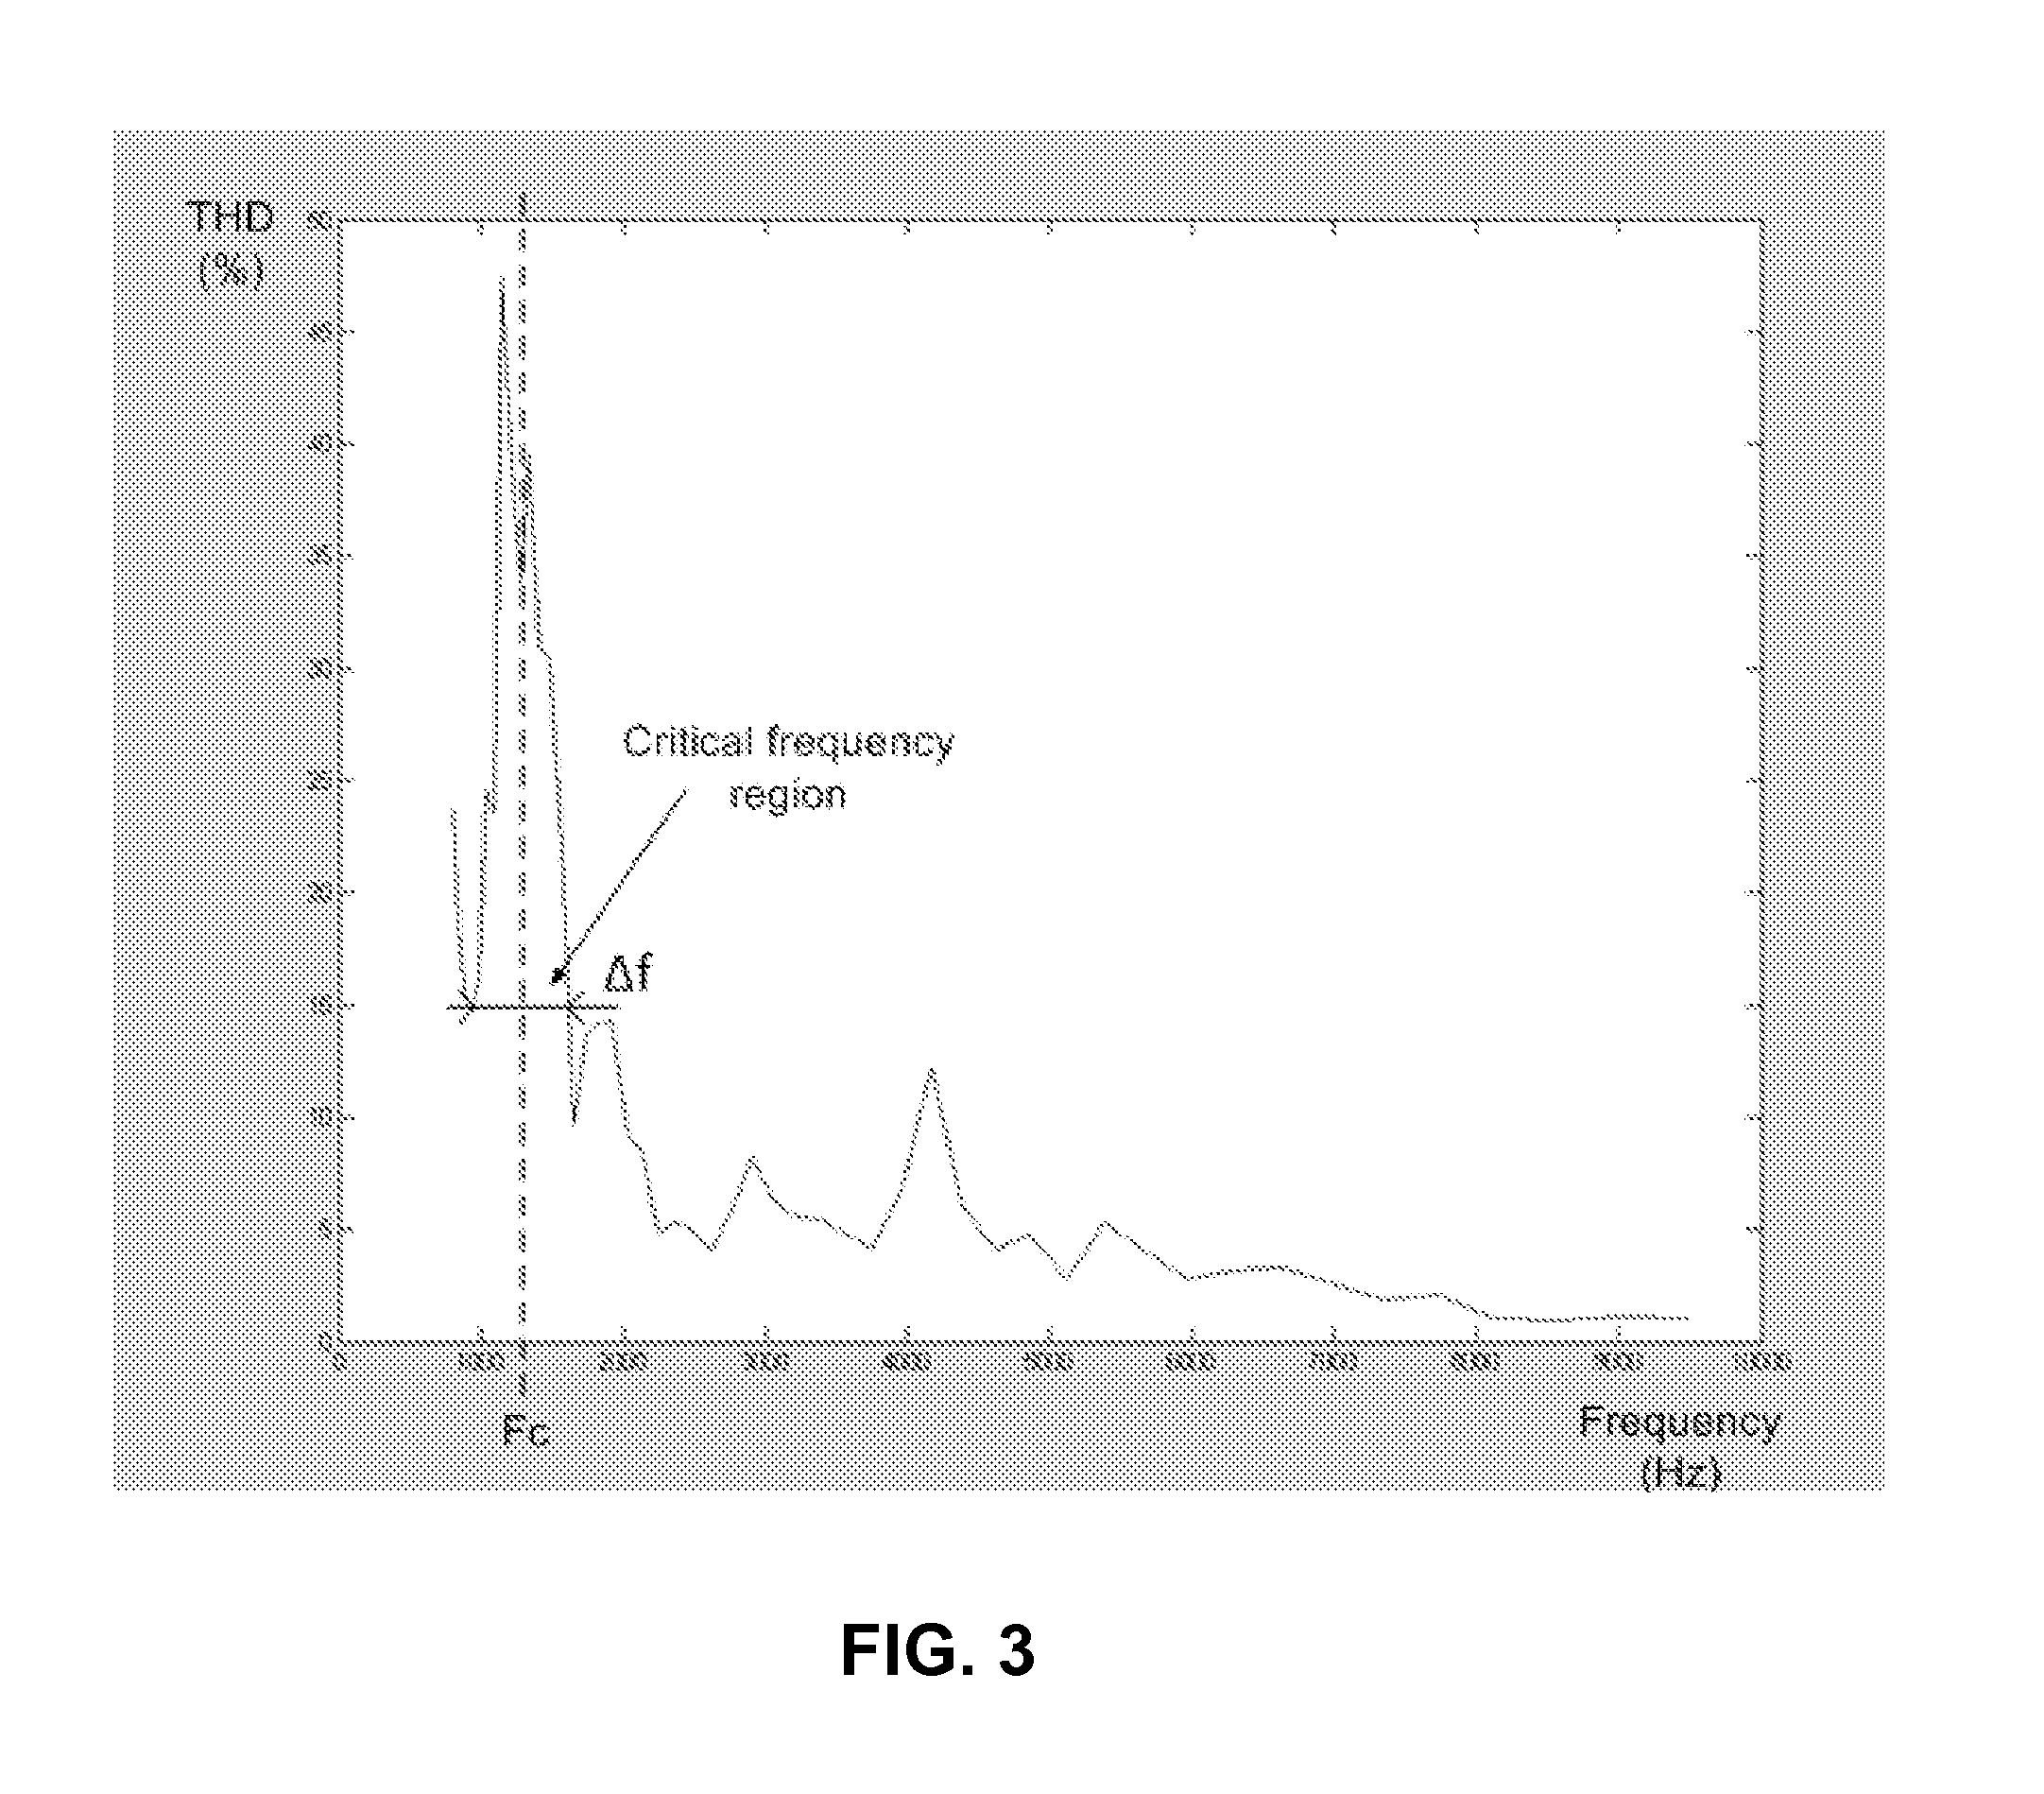 Method and system for controlling distortion in a critical frequency band of an audio signal